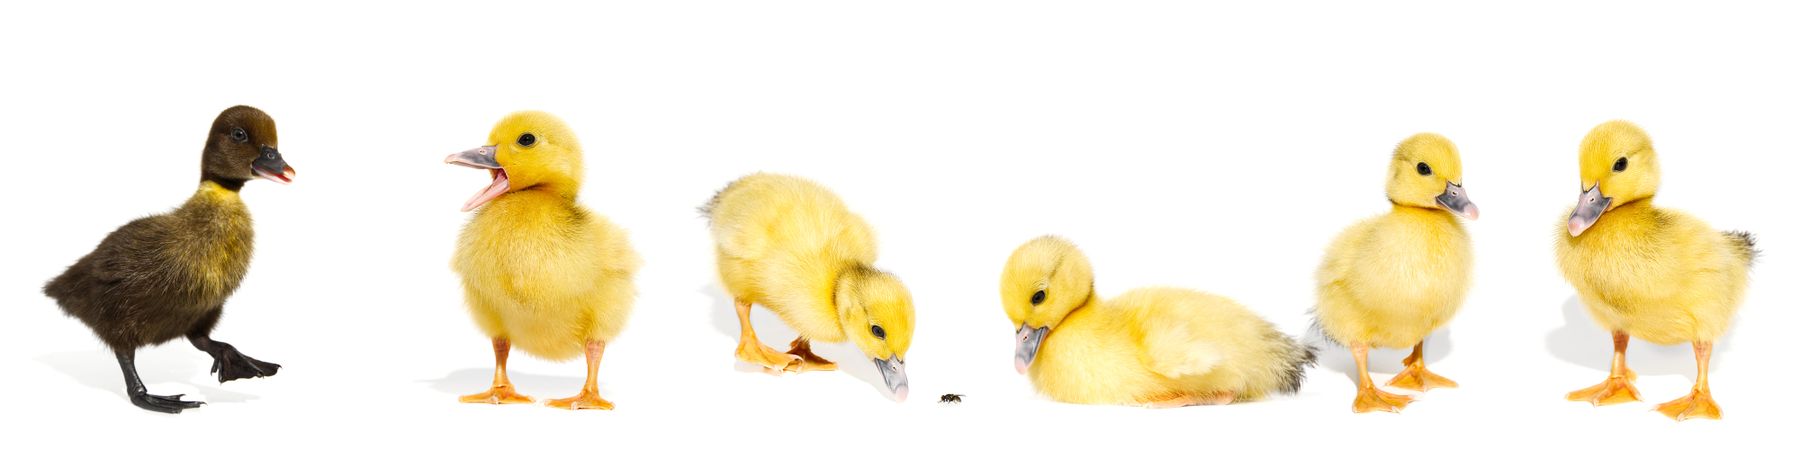 Yellow ducklings and dark duckling against light background